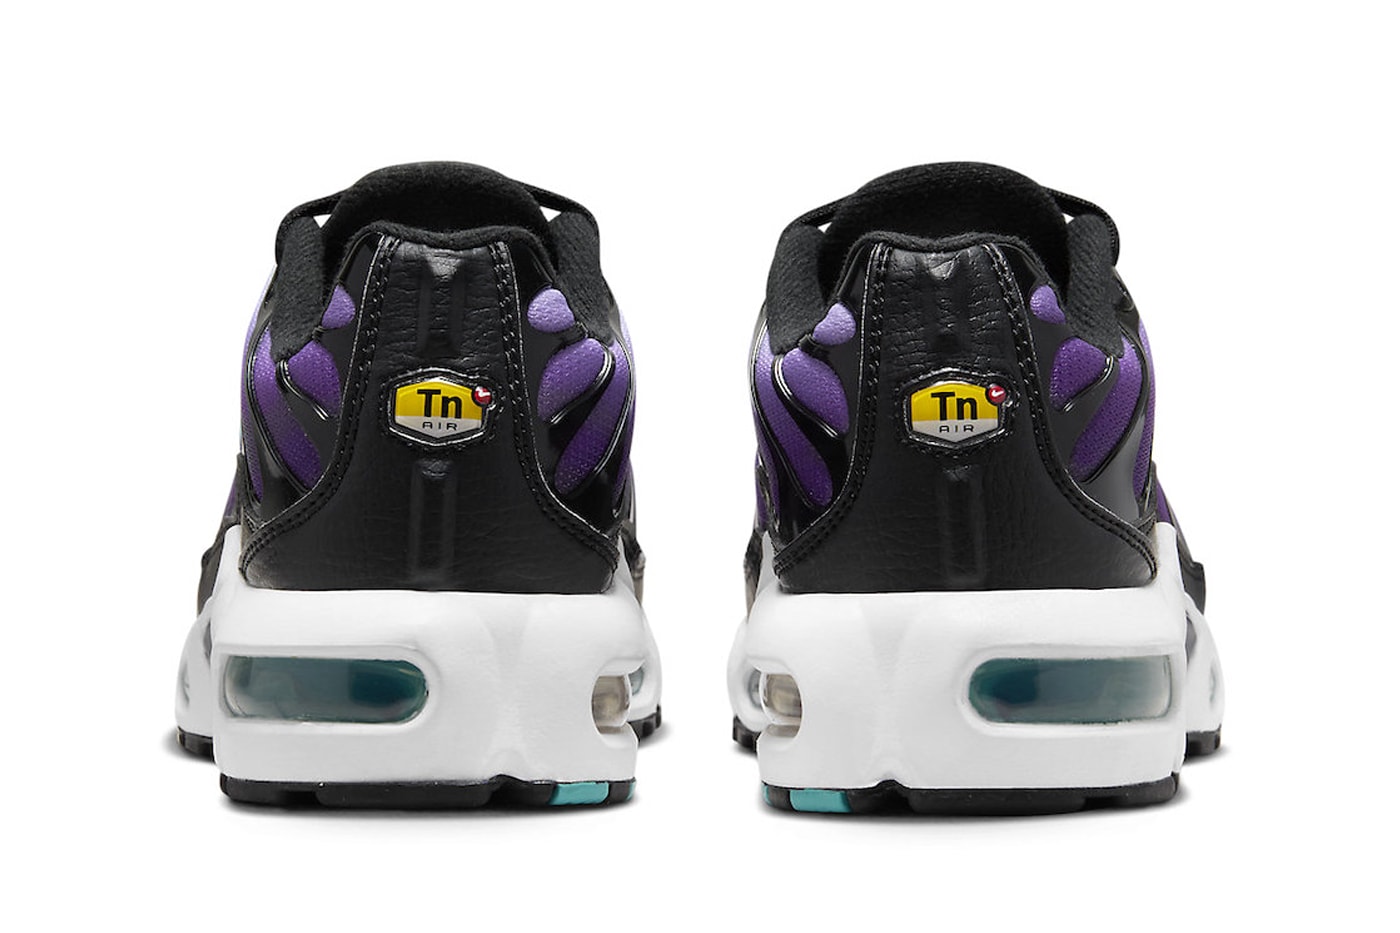 Nike Air Max Plus Gets Dressed in "Reverse Grape" FQ2415-500 purple technical sneaker athletic comfortable swoosh